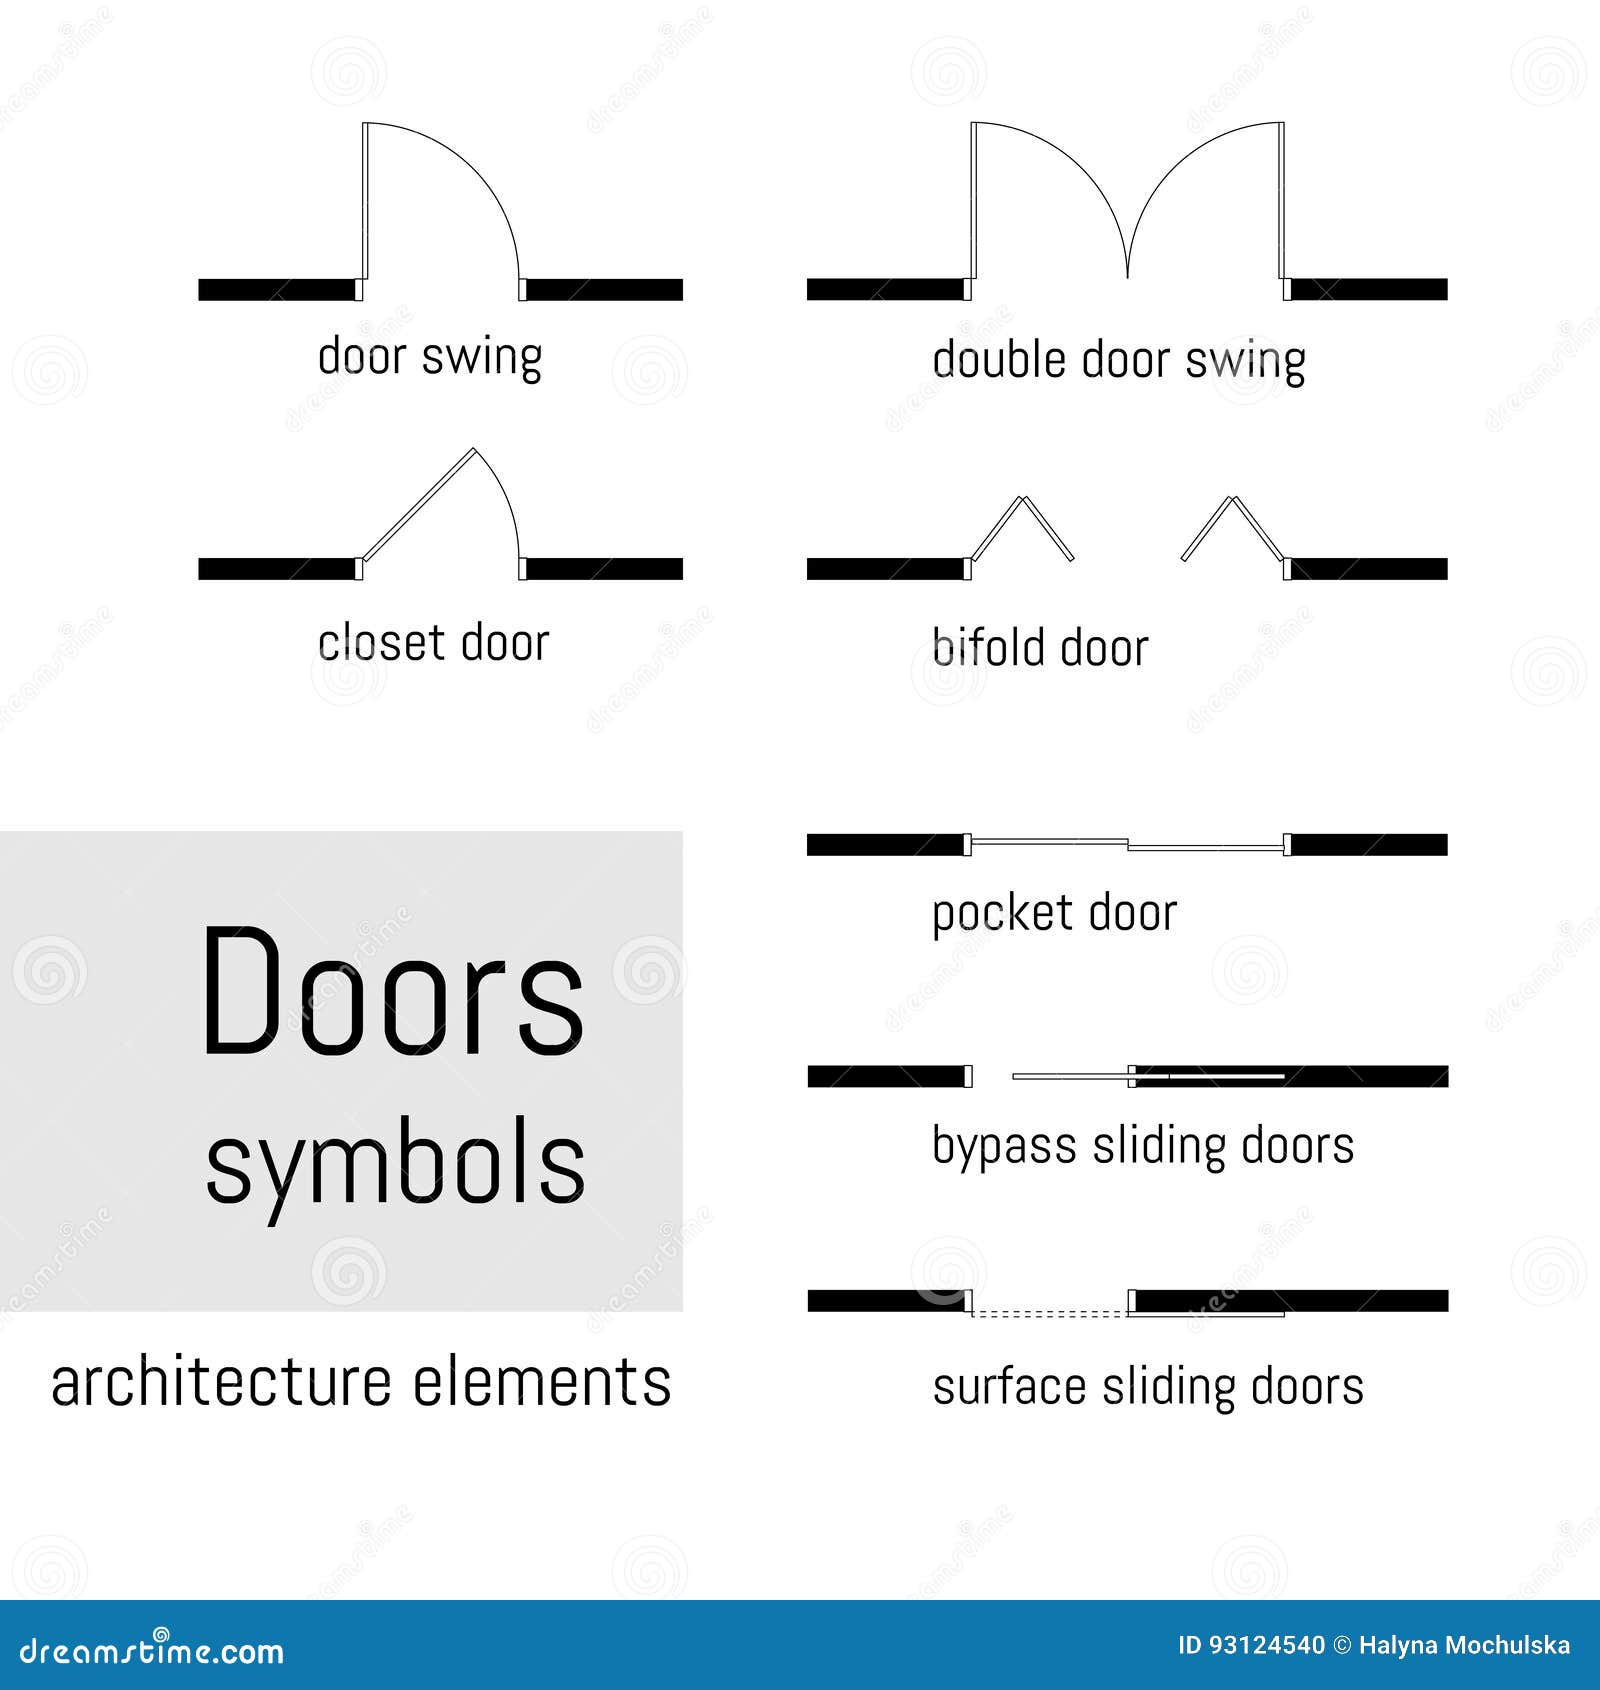 Top View Construction Symbols Used In Architecture Plans Graphic